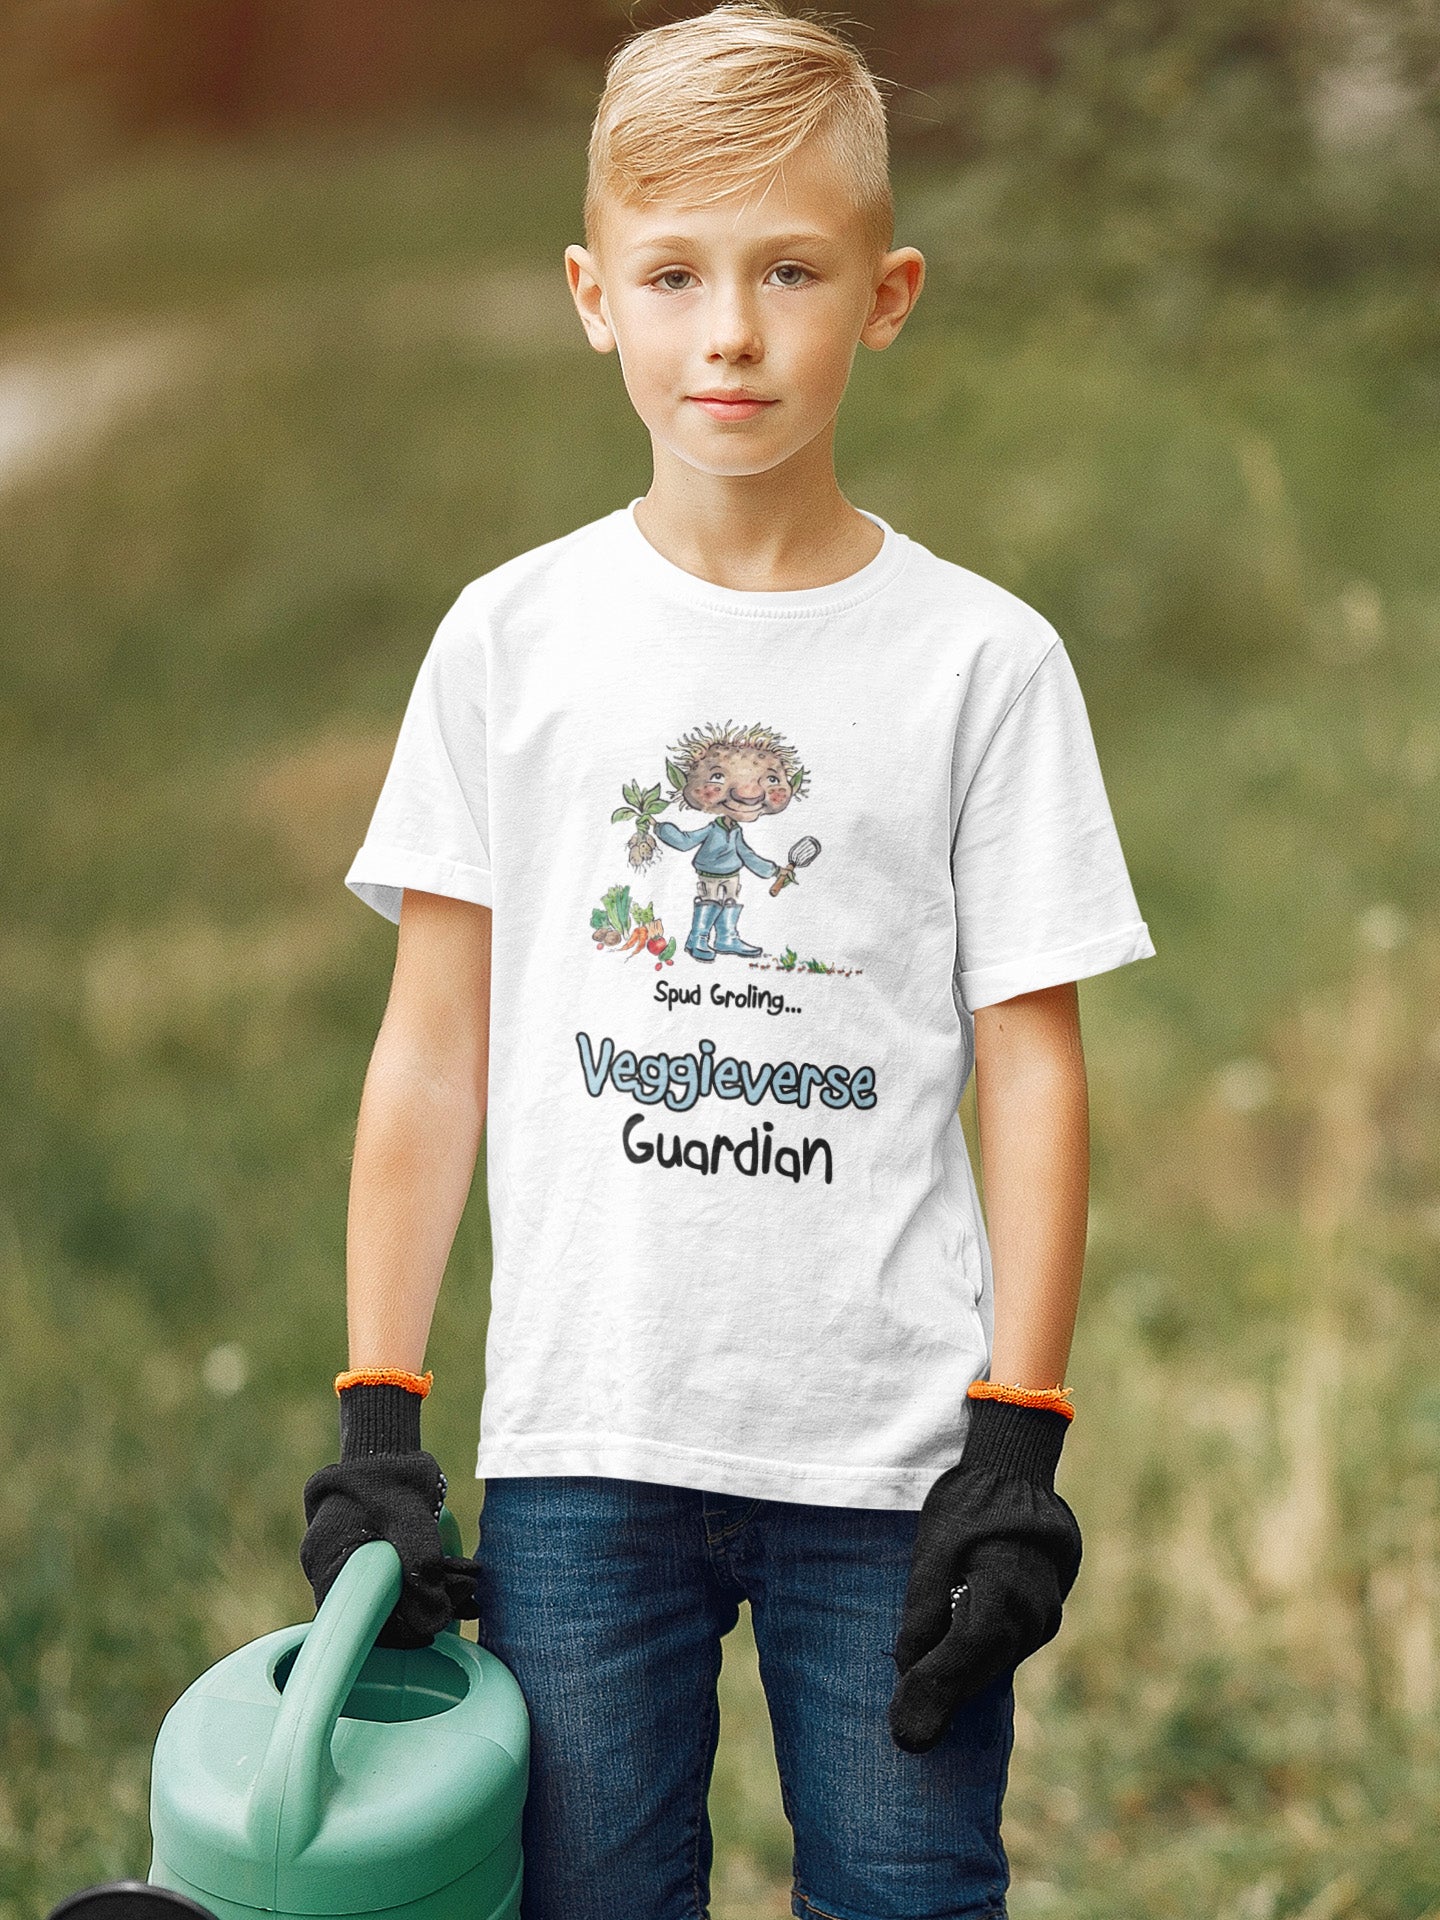 A white official Grolings kids t-shirt featuring the phrase 'Spud Groling... Veggieverse Guardian. The t-shirt showcases Spud Groling, standing with a freshly harvested potato plant in his hand, surrounded by a variety of fresh vegetables. Spud Groling's message encourages the wearer to embrace a role as a protector and caretaker of the vegetable world. Worn by a young boy holding a watering can.